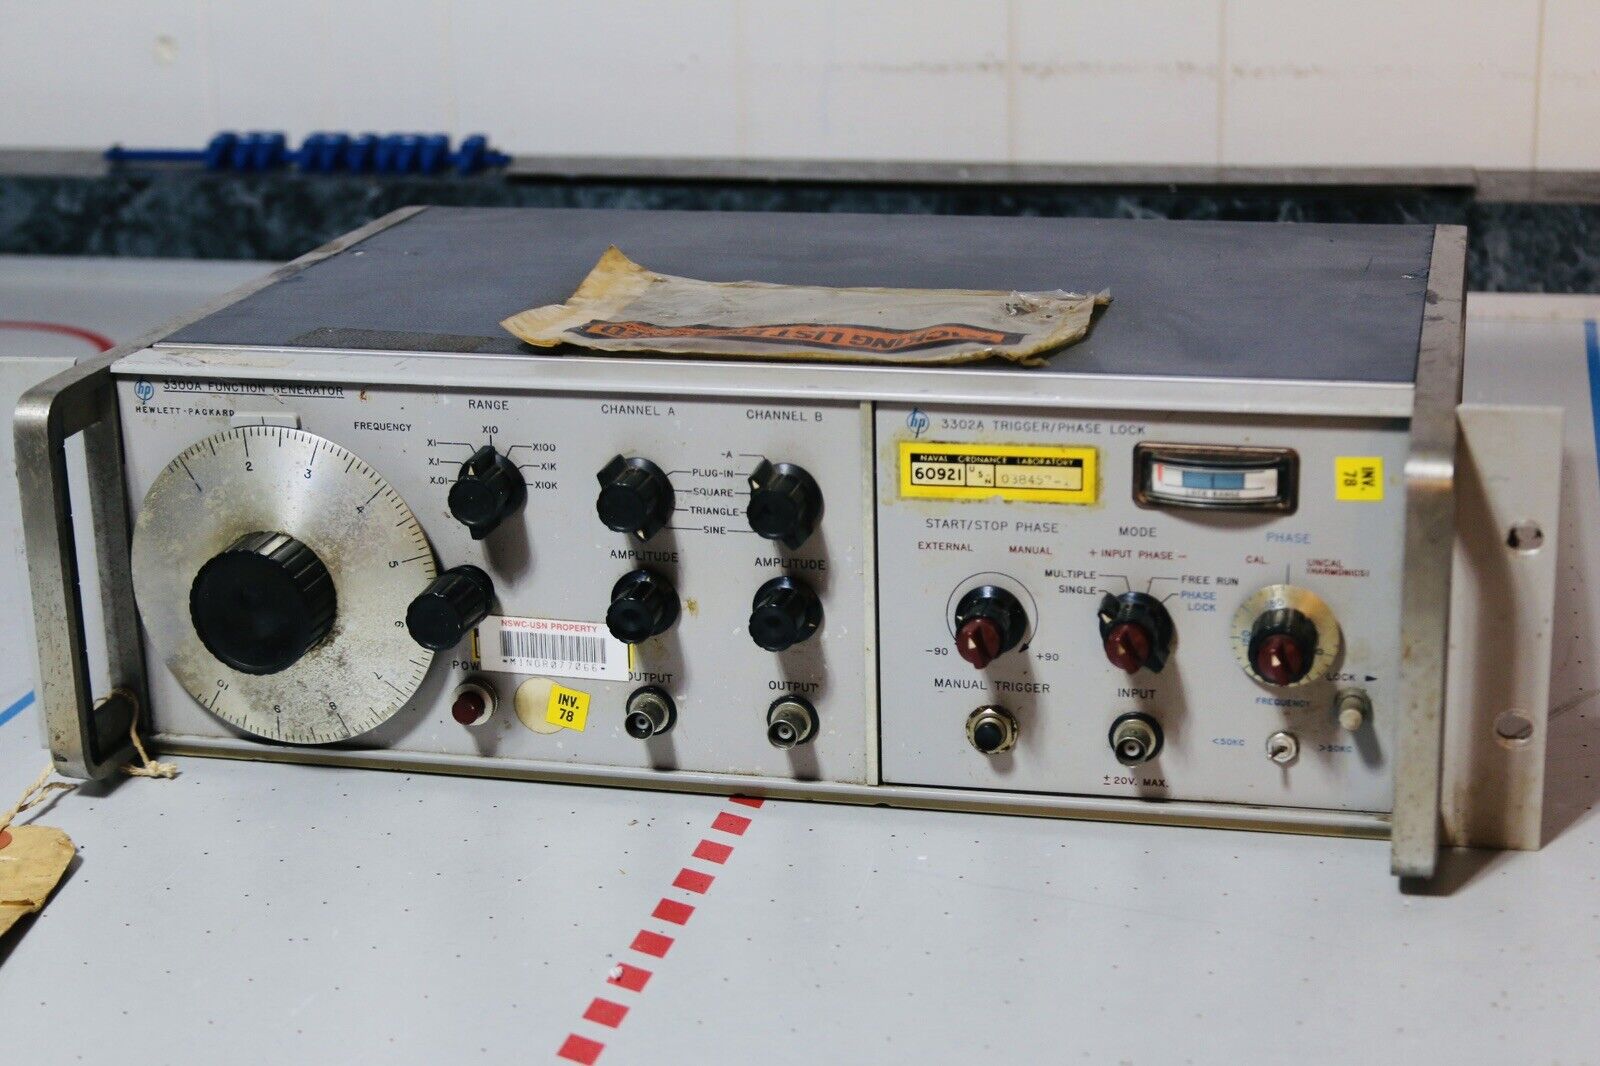 Vintage HP 3300A Function Generator w/ 3302A Trigger/Phase Lock